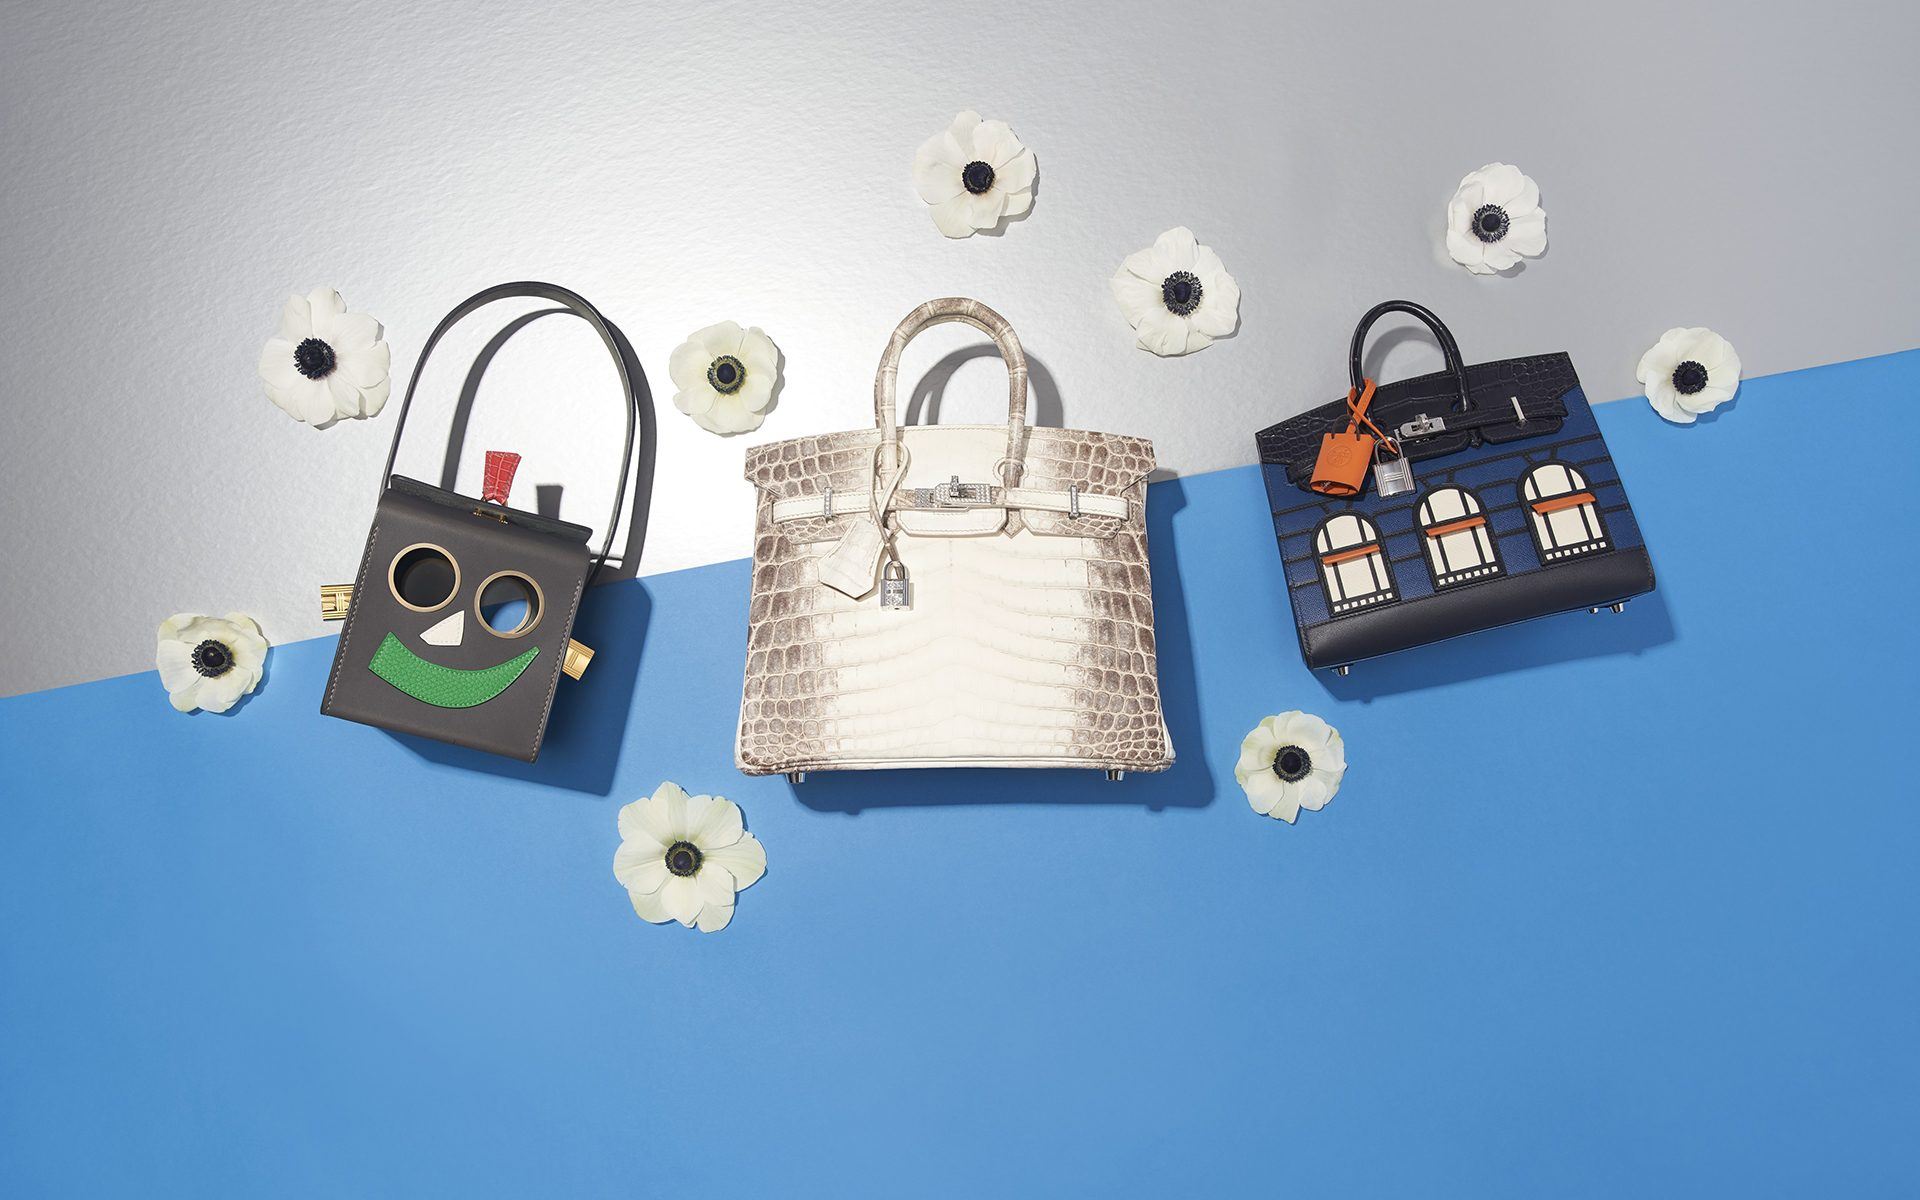 Would You Pay $300,000 for This Purse? Birkin Bag Sets New Record